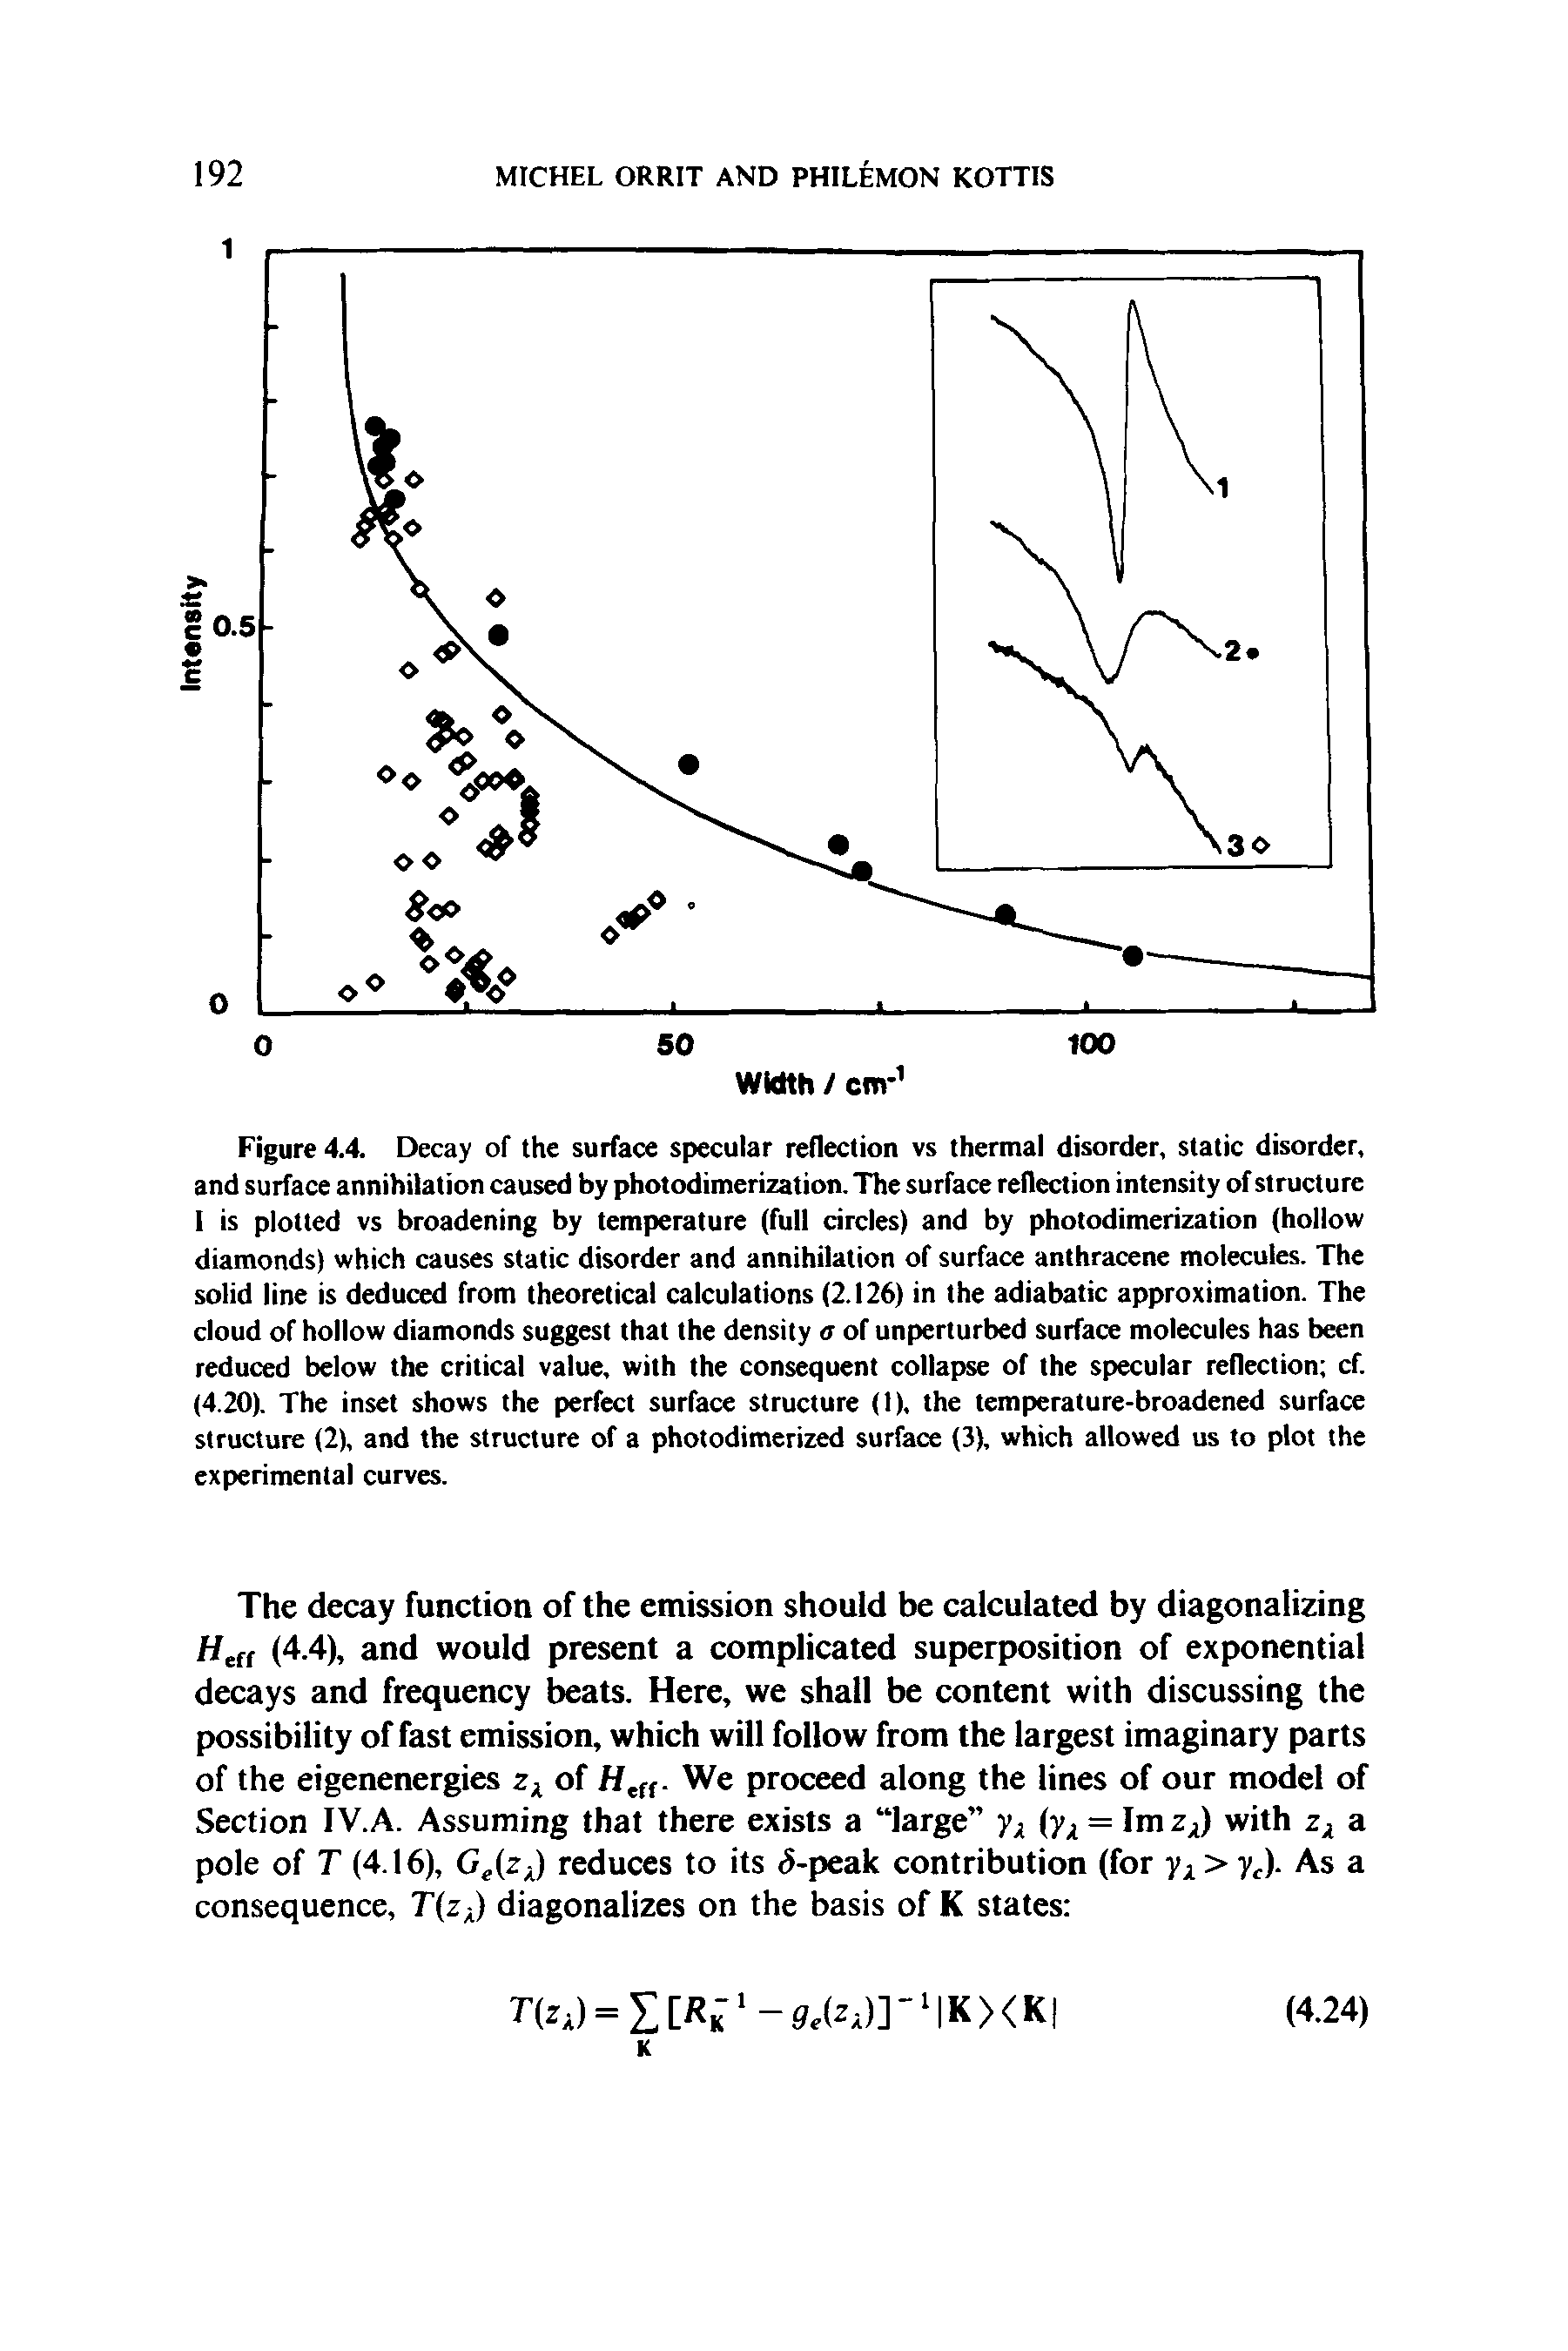 Figure 4.4. Decay of the surface specular reflection vs thermal disorder, static disorder, and surface annihilation caused by photodimerization. The surface reflection intensity of structure I is plotted vs broadening by temperature (full circles) and by photodimerization (hollow diamonds) which causes static disorder and annihilation of surface anthracene molecules. The solid line is deduced from theoretical calculations (2.126) in the adiabatic approximation. The cloud of hollow diamonds suggest that the density a of unperturbed surface molecules has been reduced below the critical value, with the consequent collapse of the specular reflection cf. (4.20). The inset shows the perfect surface structure (1), the temperature-broadened surface structure (2), and the structure of a photodimerized surface (3), which allowed us to plot the experimental curves.